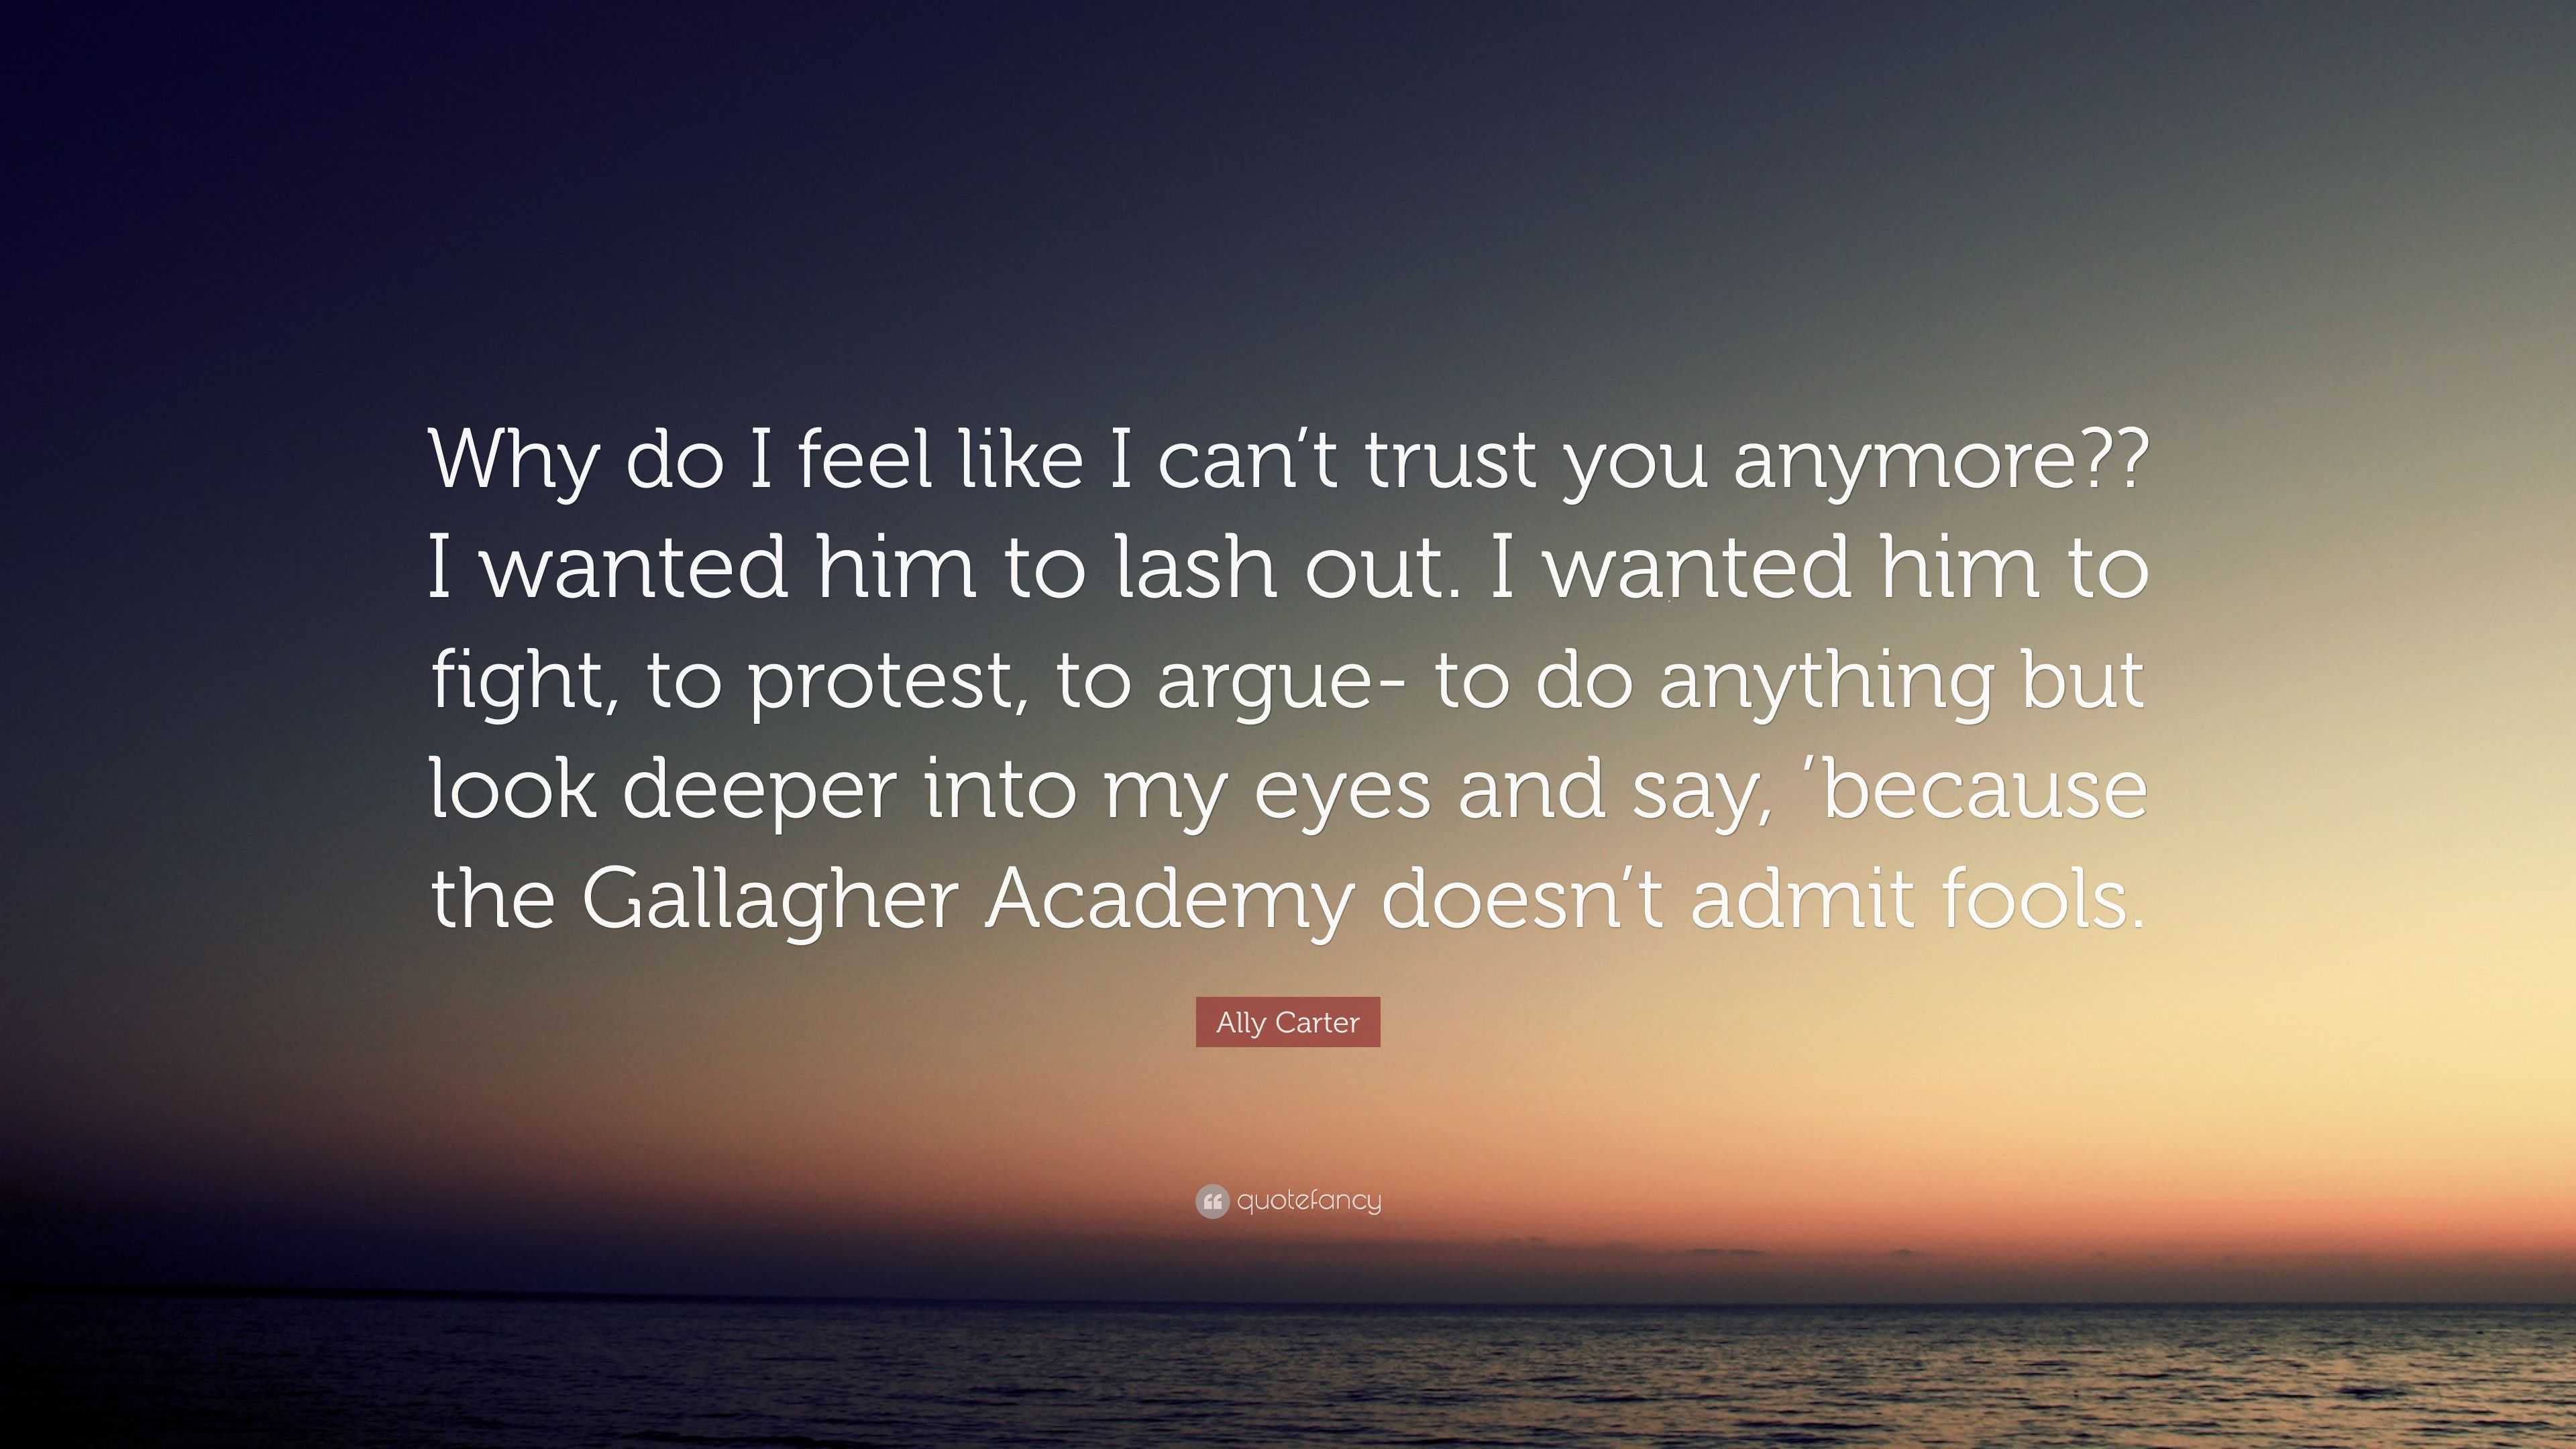 Ally Carter Quote: “Why Do I Feel Like I Can't Trust You Anymore?? I Wanted Him To Lash Out. I Wanted Him To Fight, To Protest, To Argue- To...”